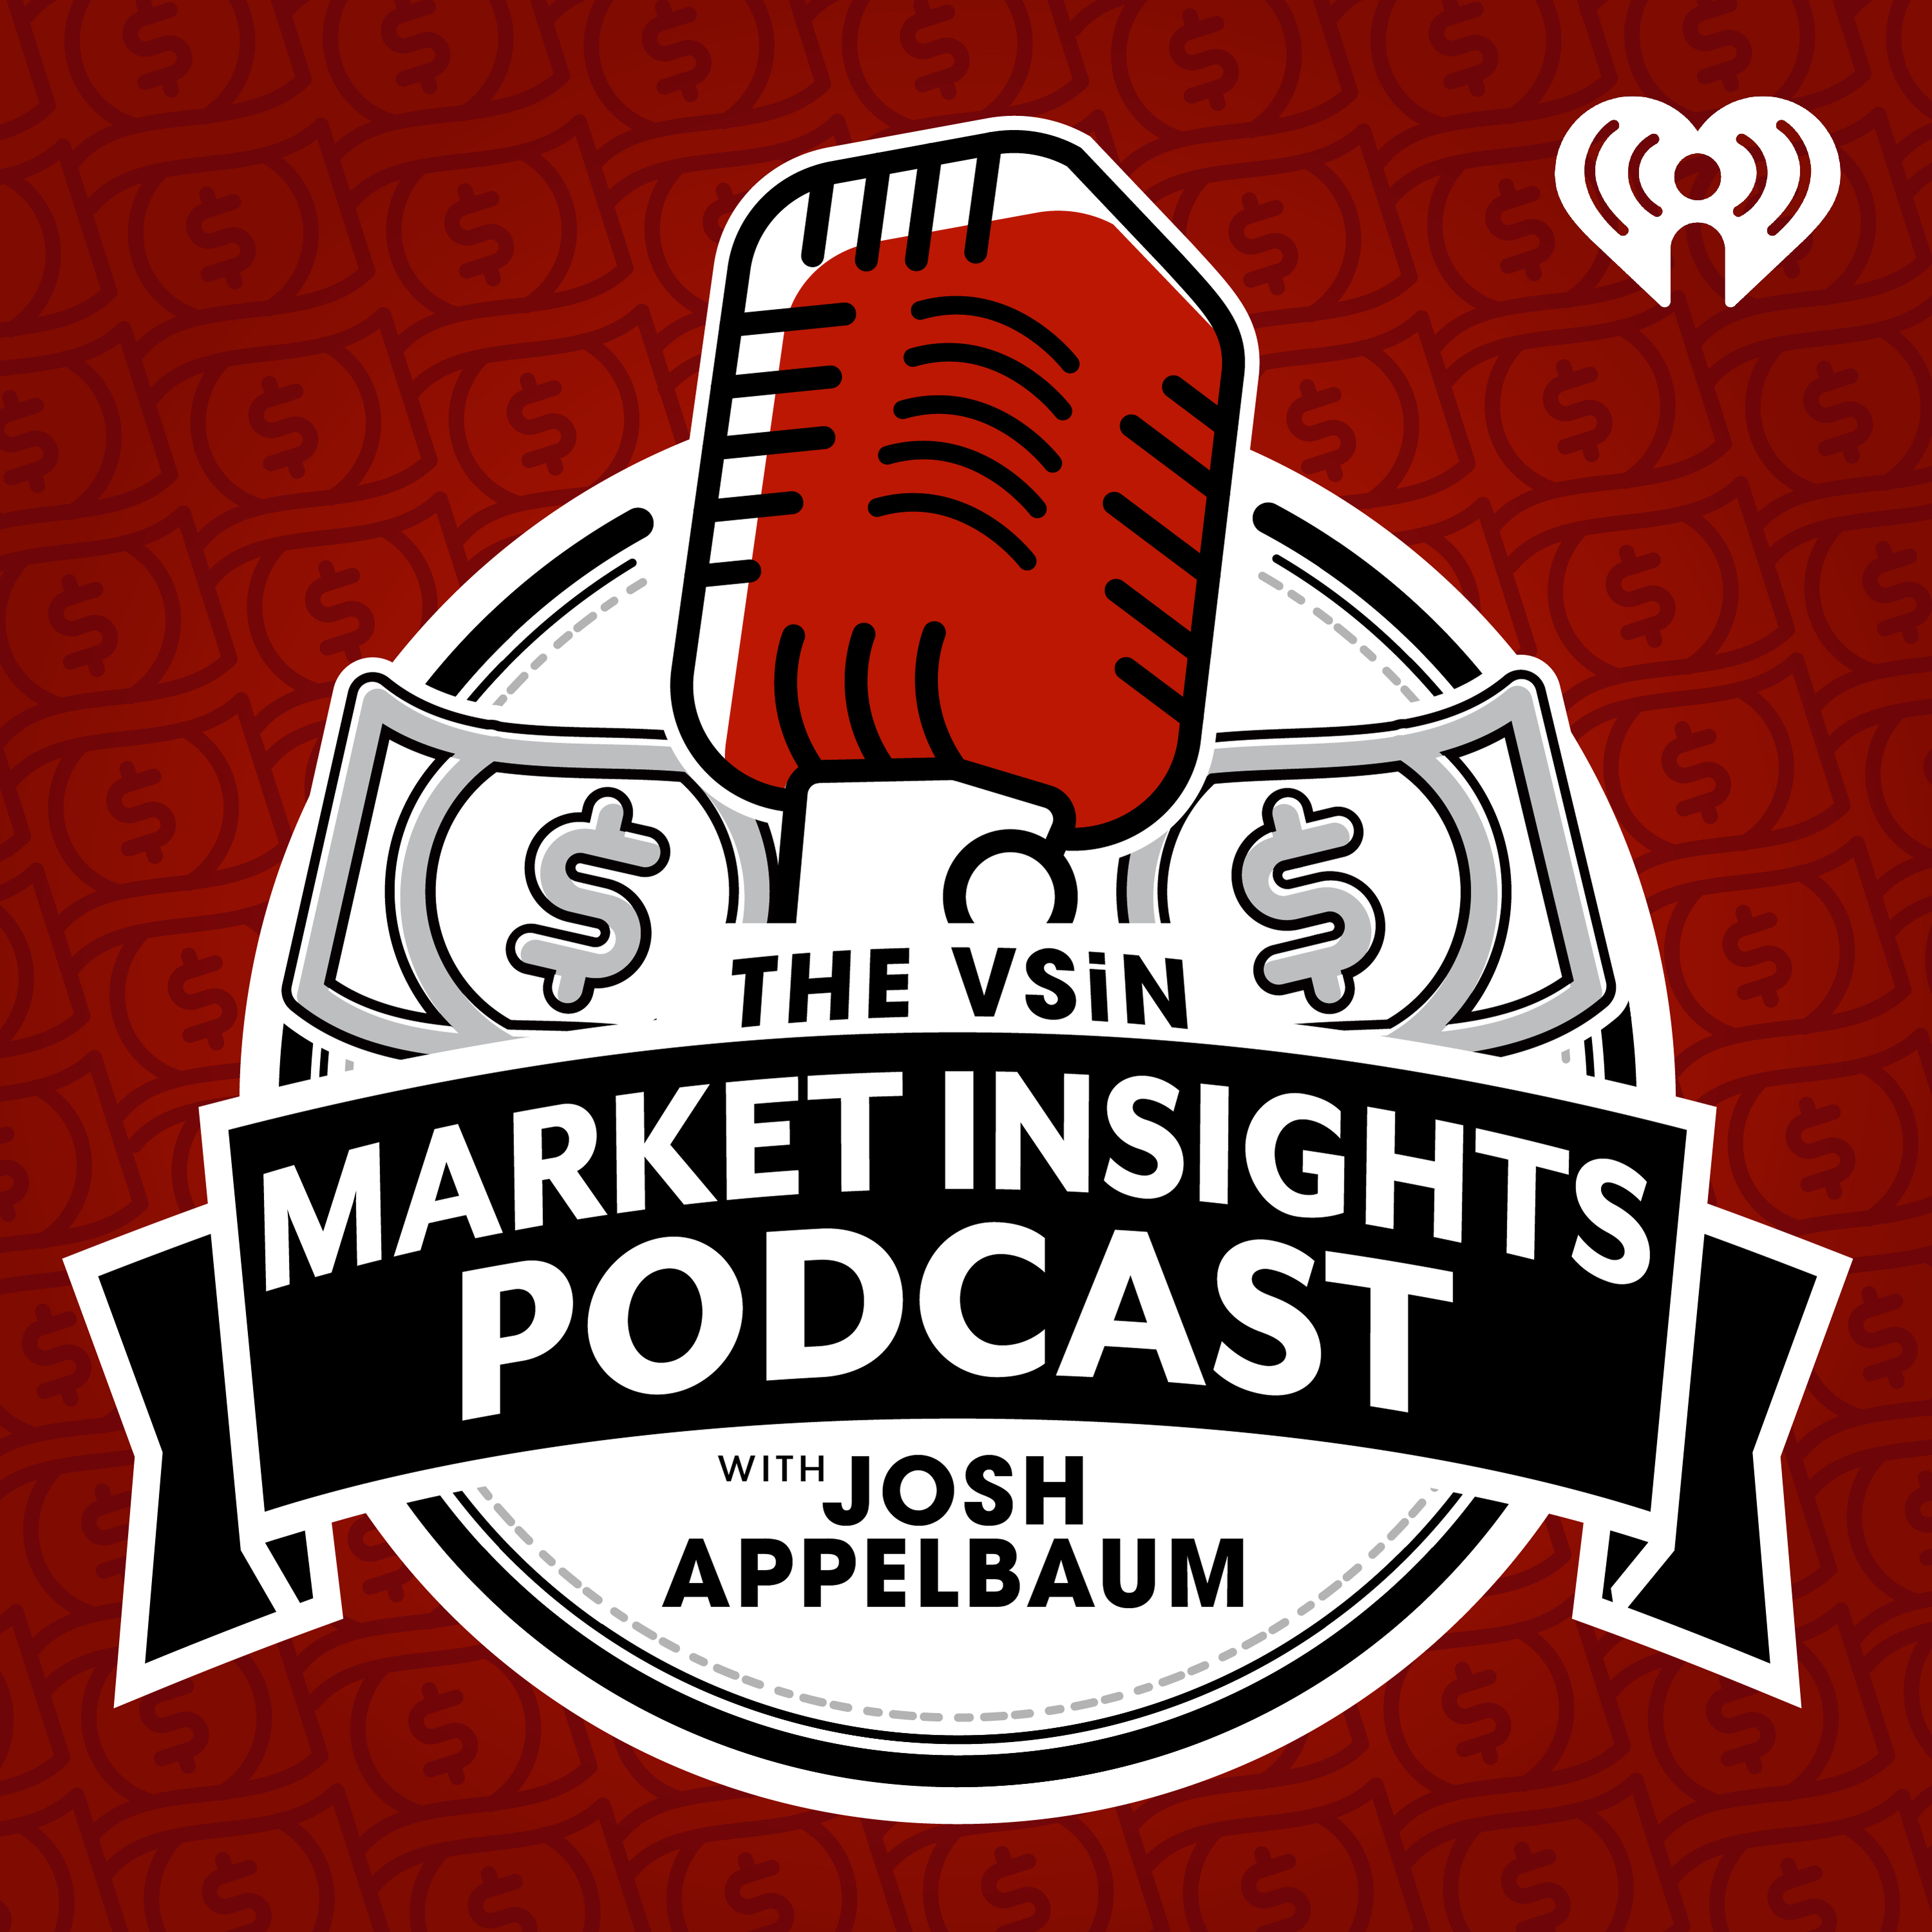 The VSiN Market Insights Podcast with Josh Appelbaum | March 11, 2022